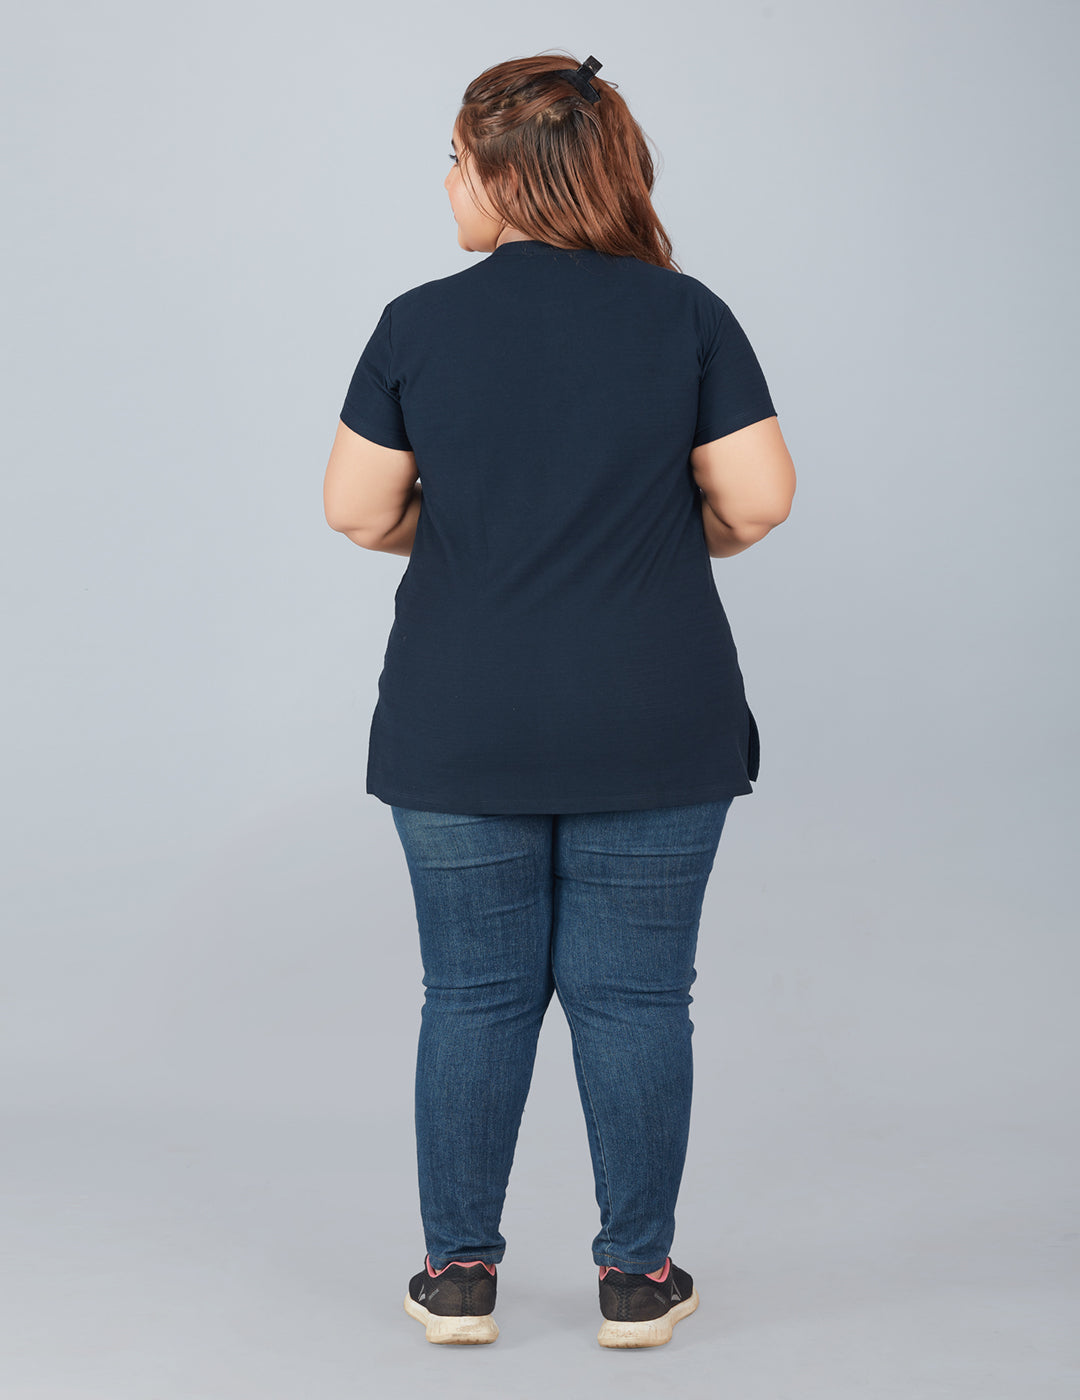 Plus Size Cotton T-shirts For Summer - Imperial Blue